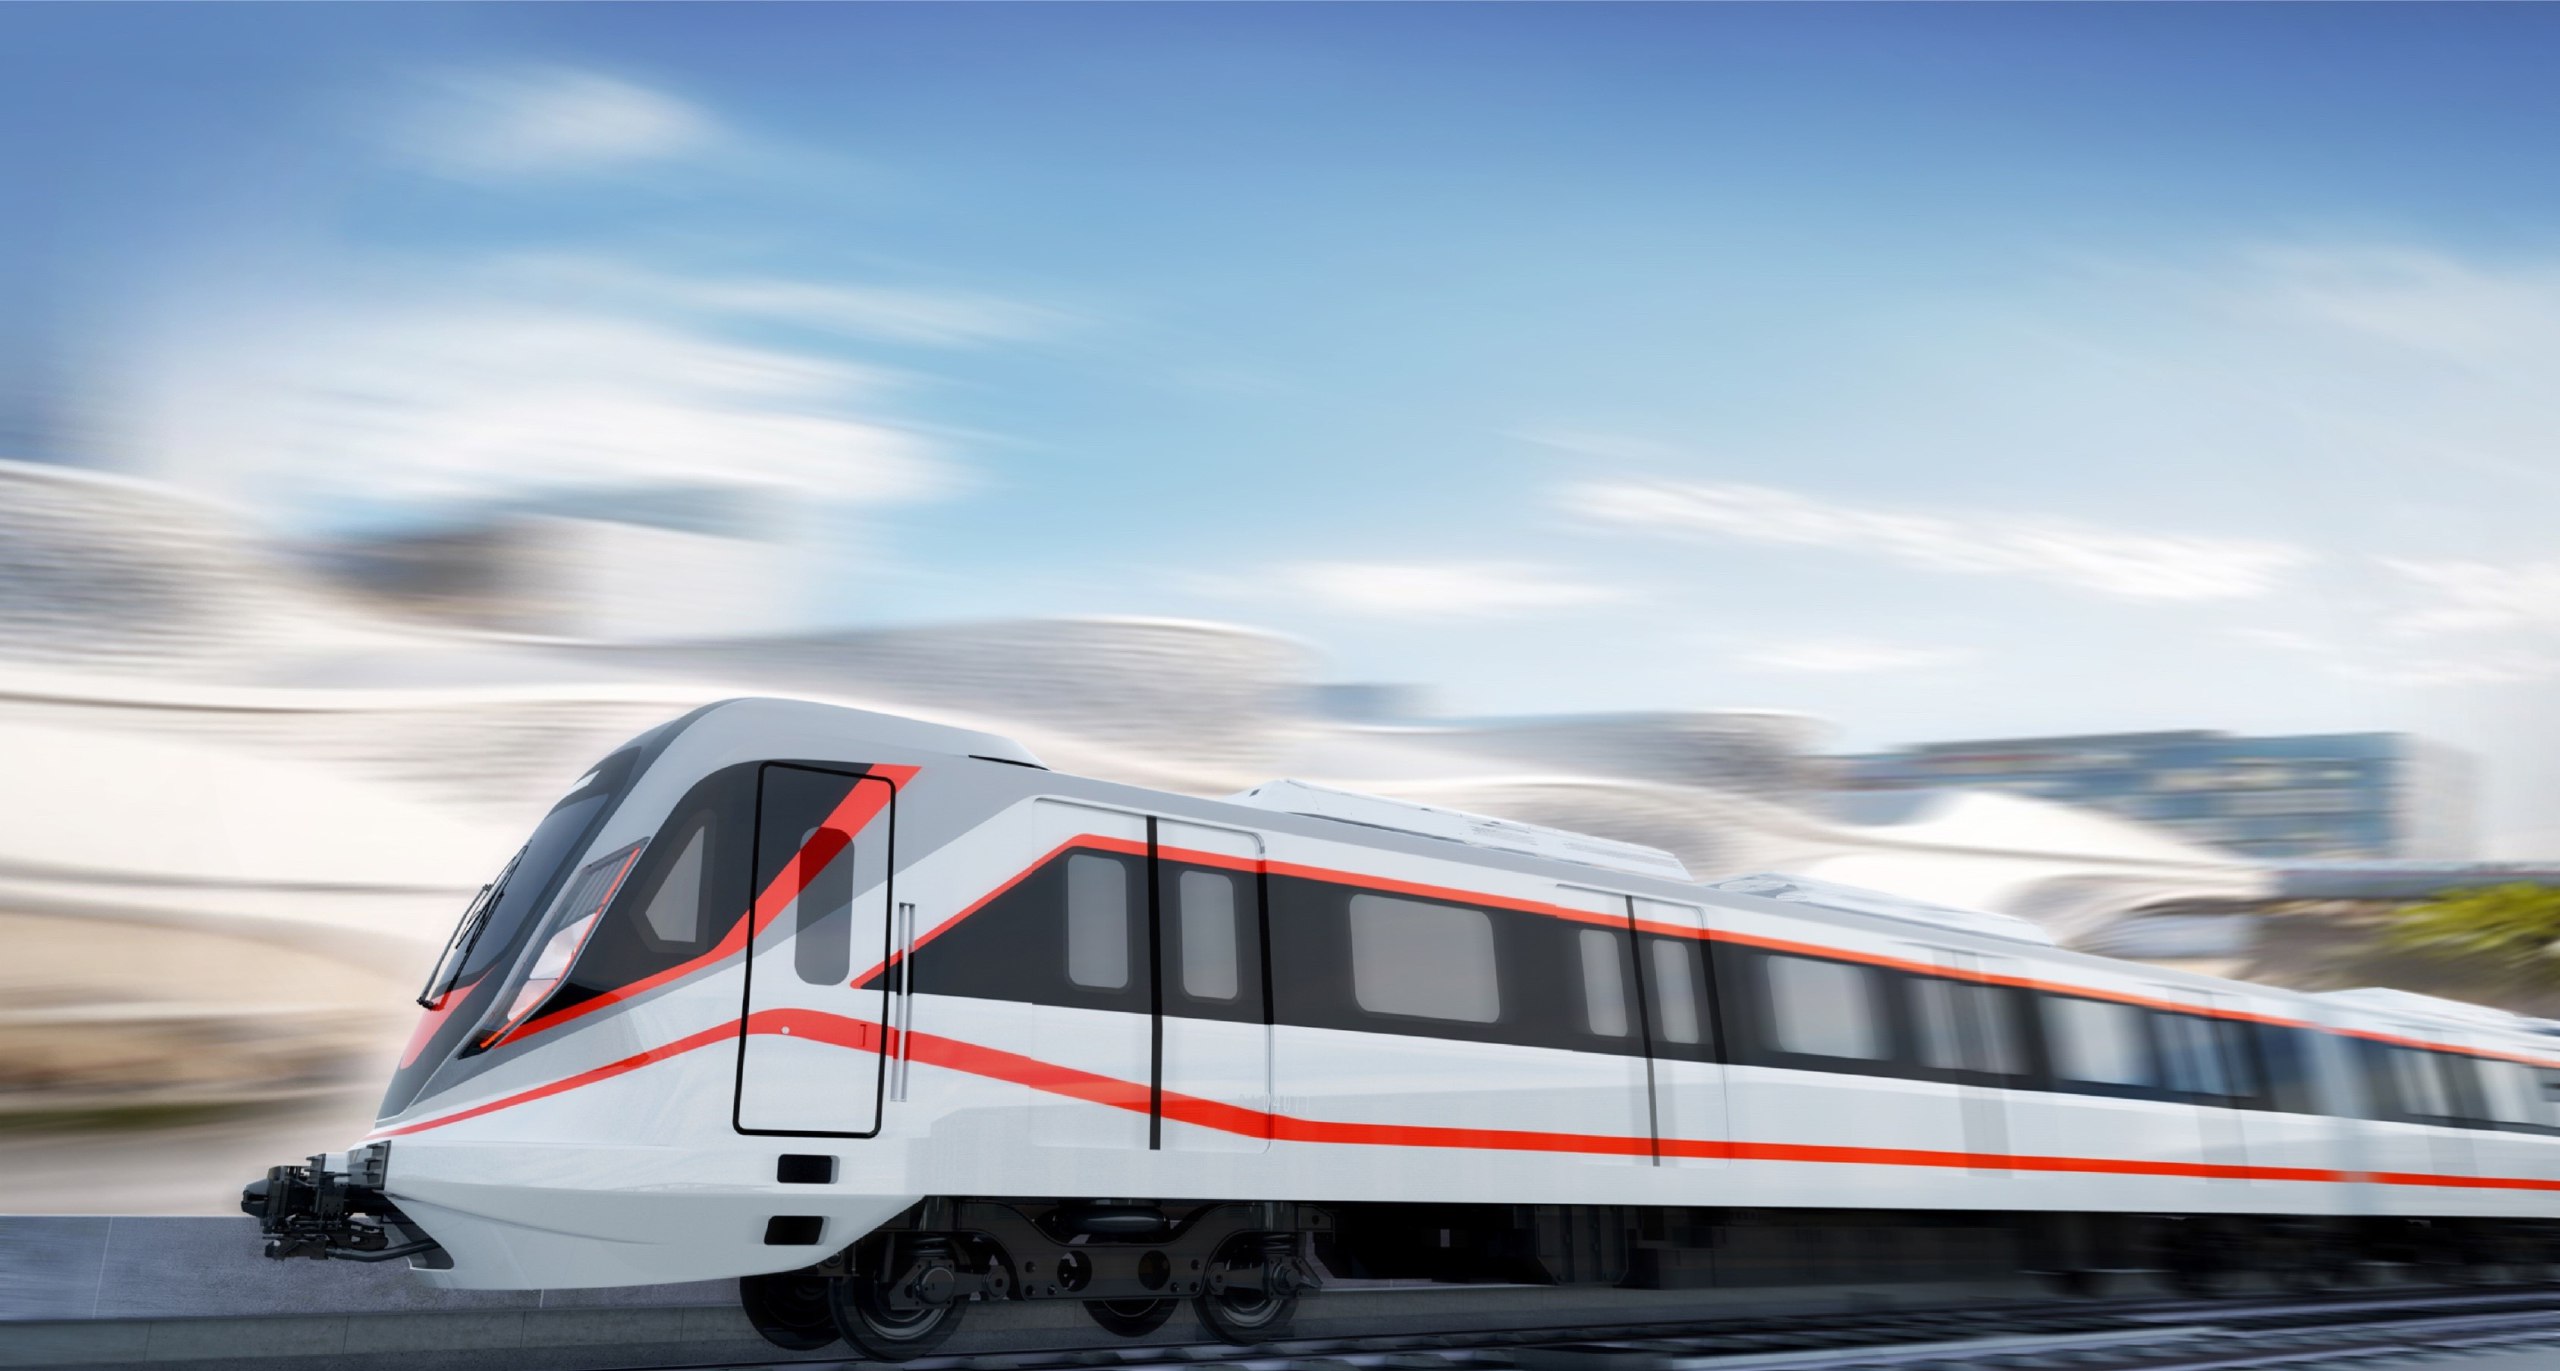 Rendering of the CRRC train for Indonesia